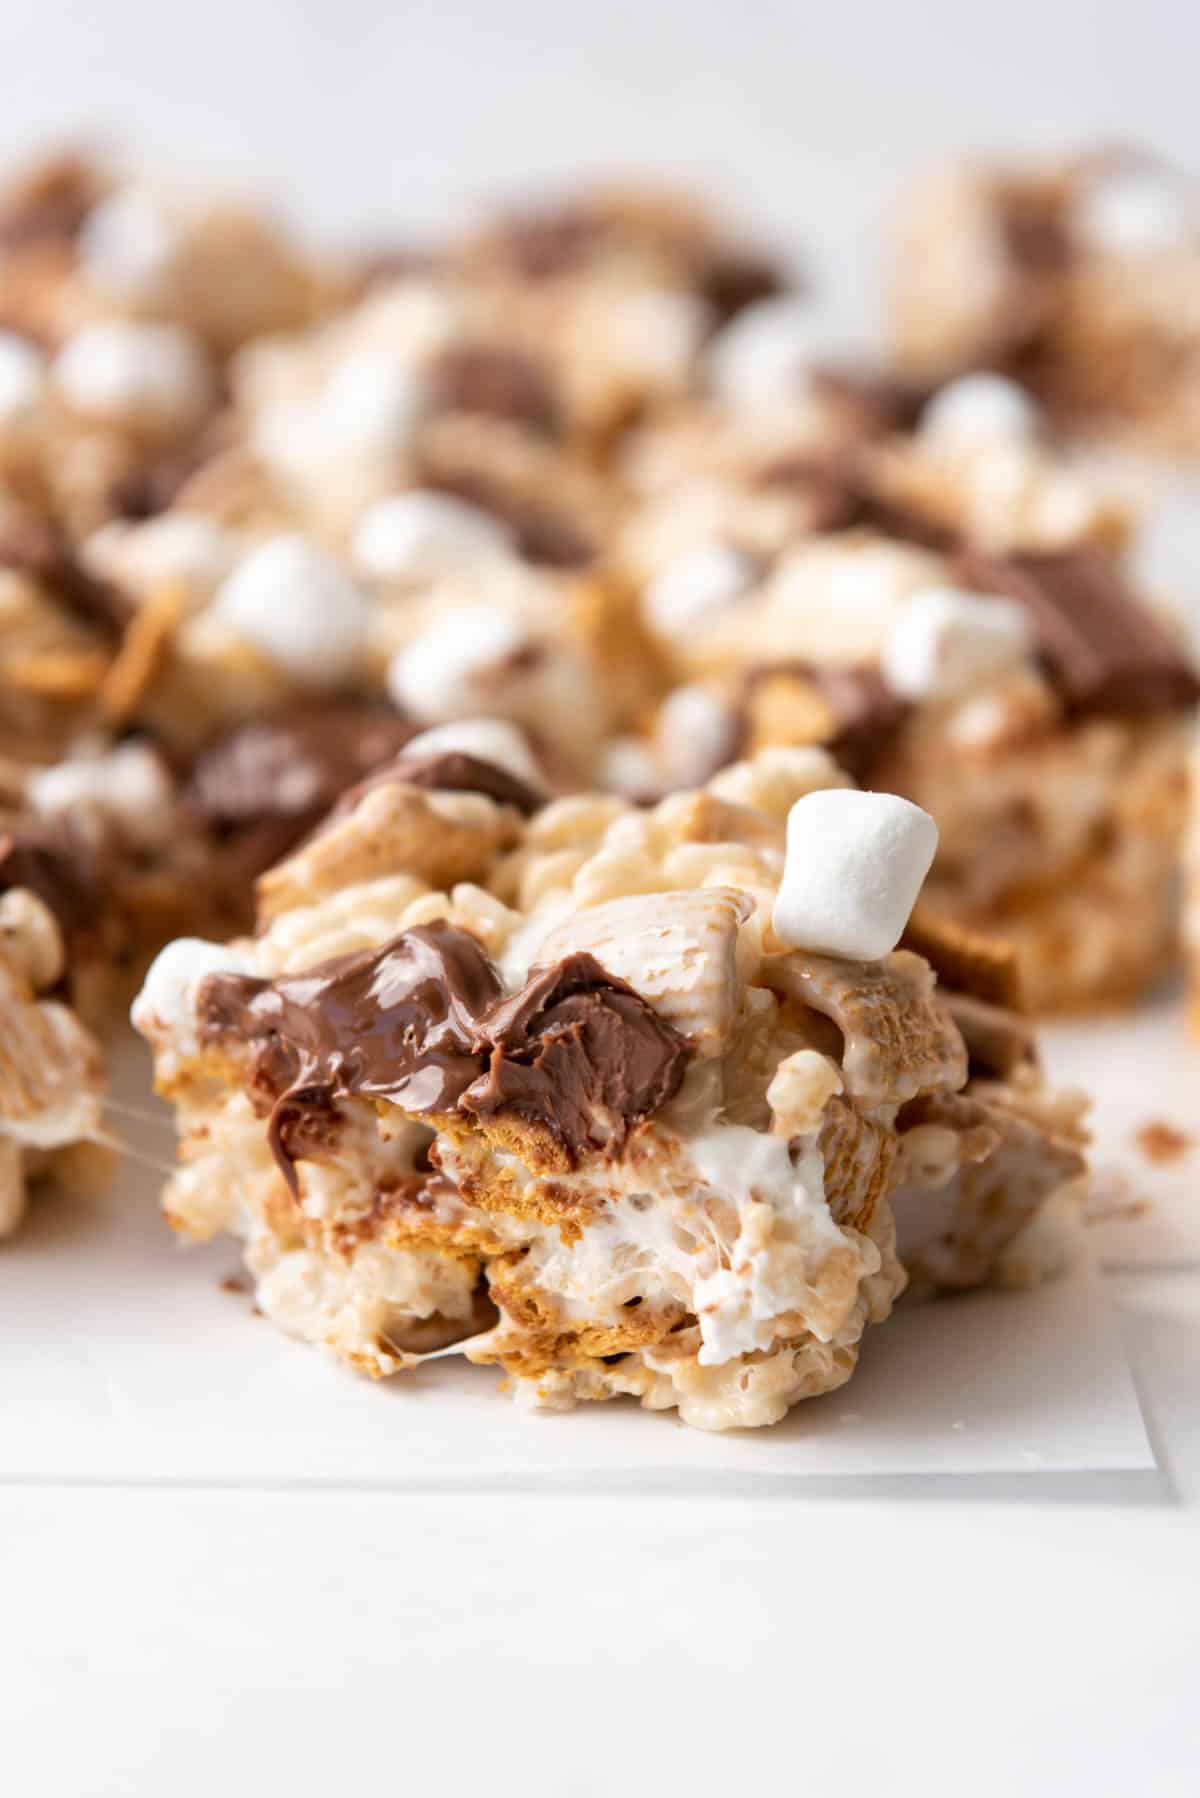 A s'mores rice krispy treat made with Golden Grahams cereal and Hershey's bars.